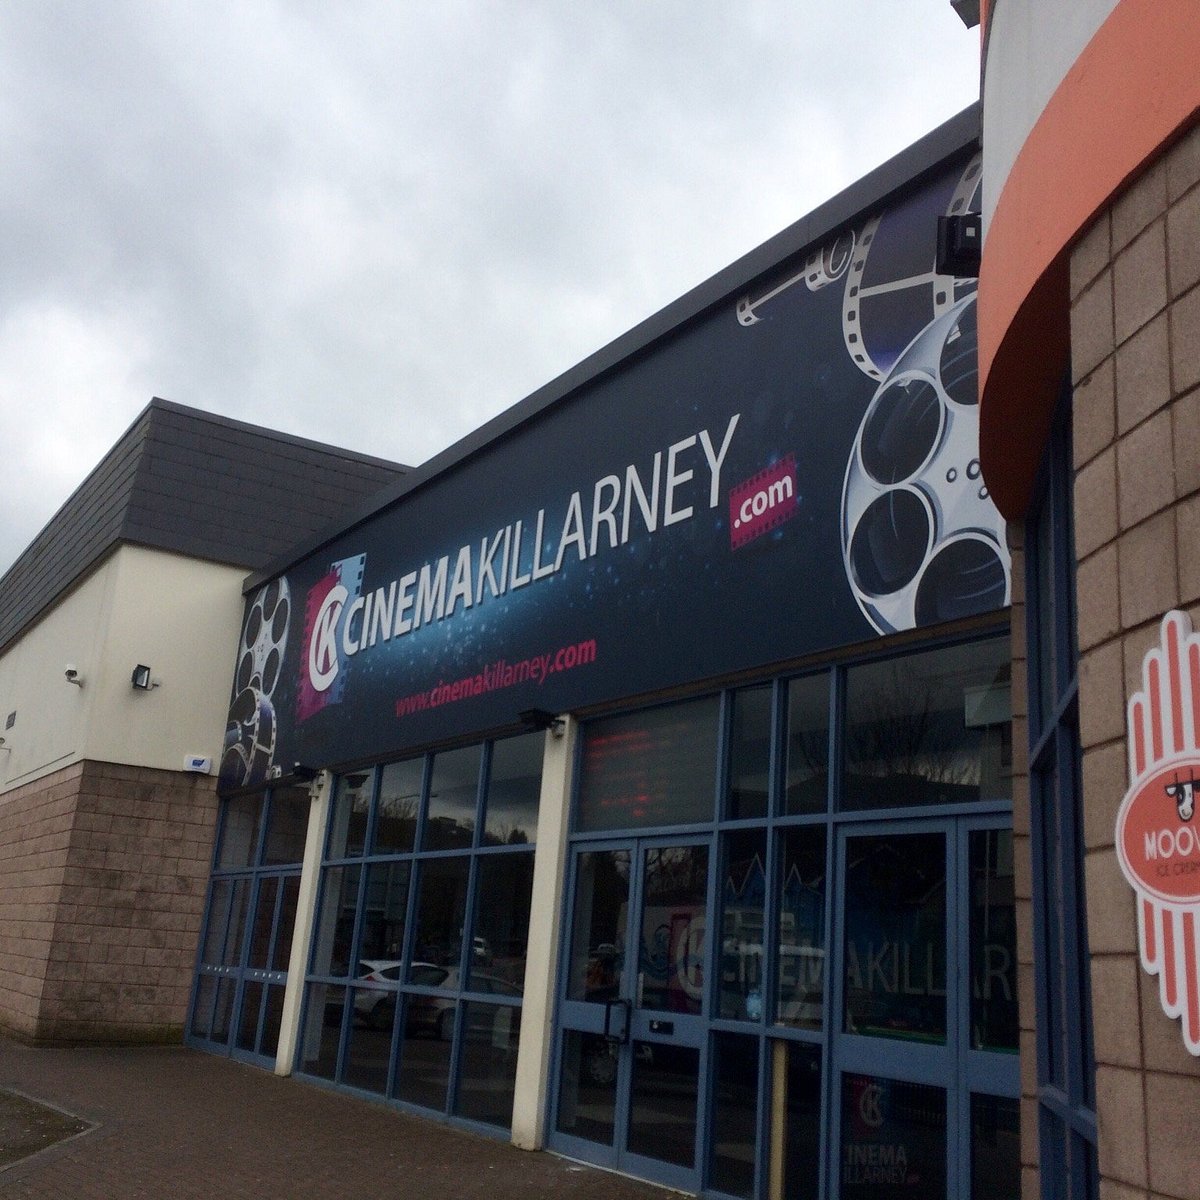 Cinema Killarney - All You Need To Know Before You Go